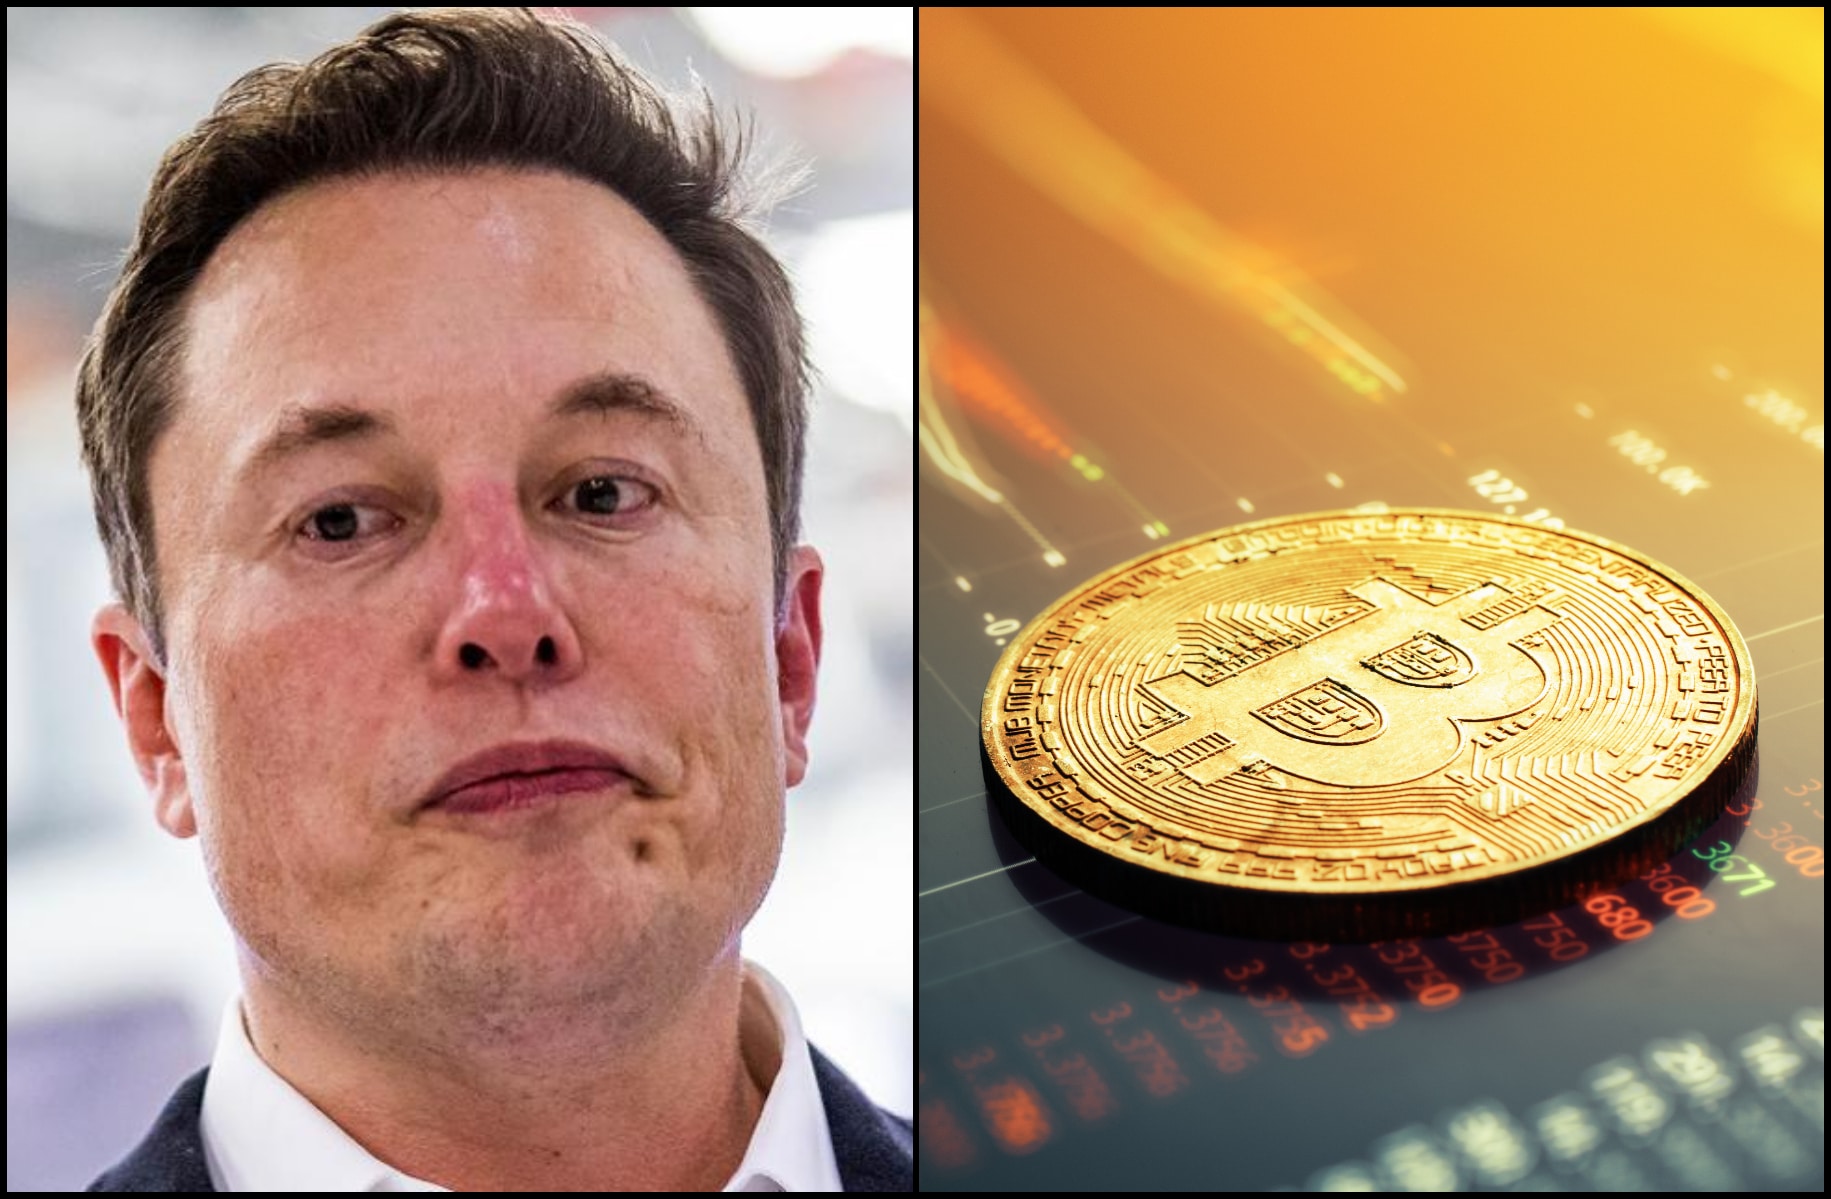 Musk just fired a bitcoin value.  The moment is approaching when it will be "welcome" for Tesla again